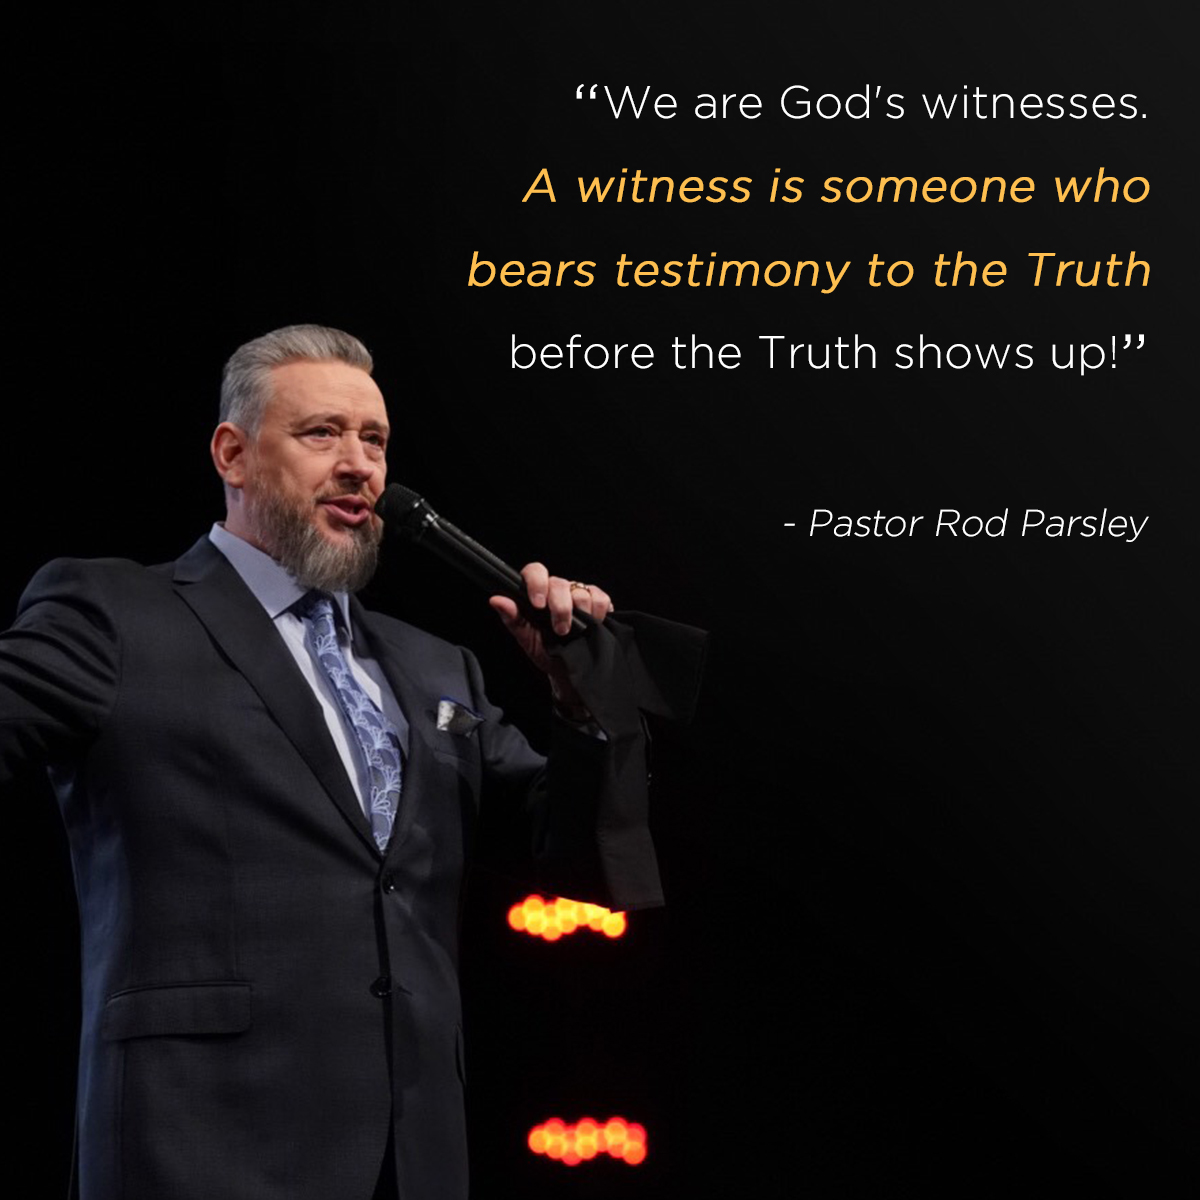 “We are God‘s witnesses. A witness is someone who bears testimony to the Truth before the Truth shows up!” – Pastor Rod Parsley